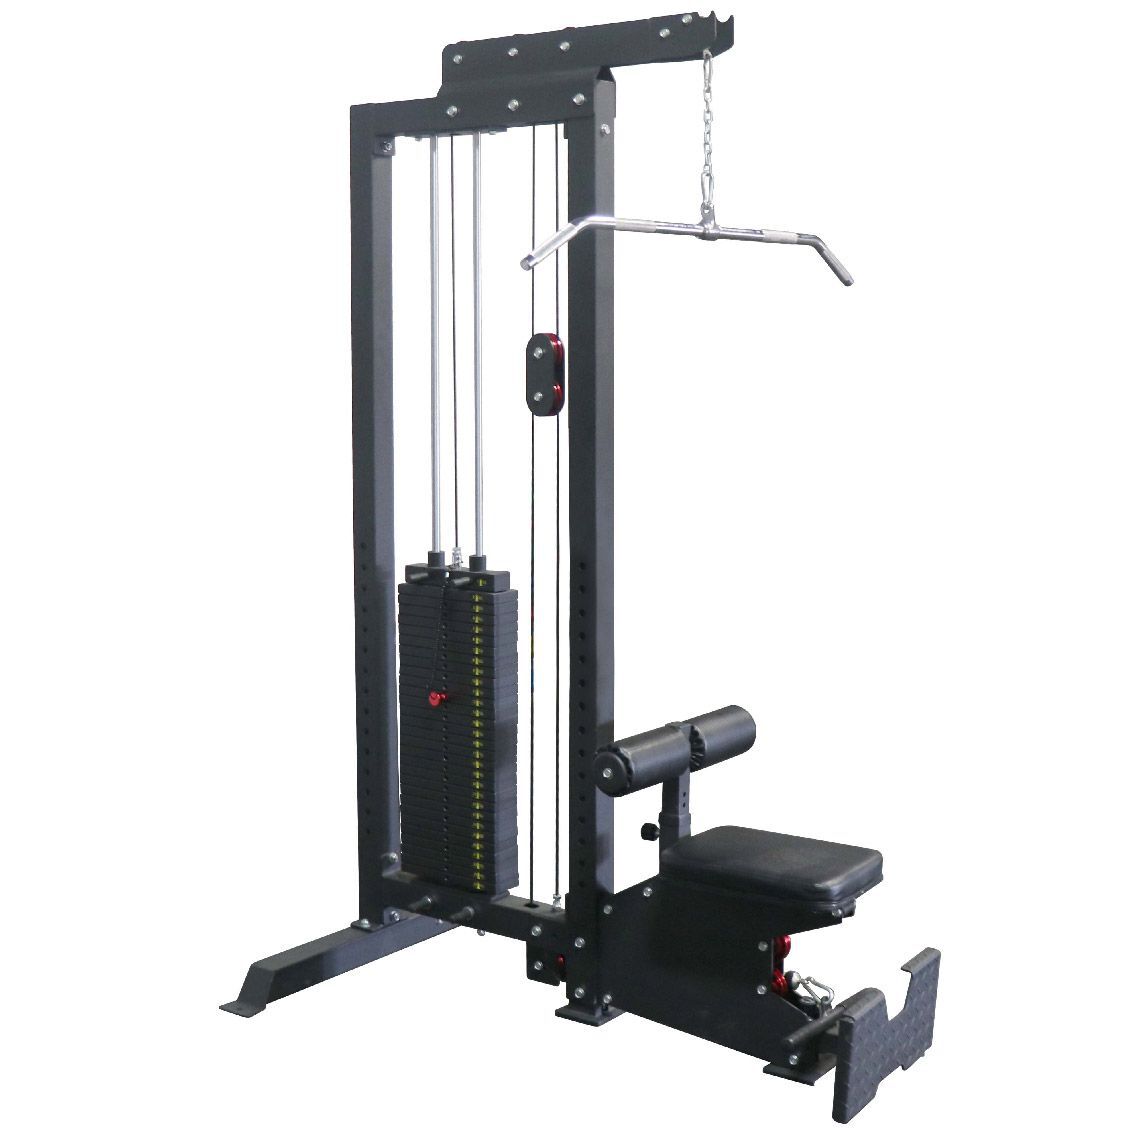 Wall Mounted Cable Pulley System Lat Pull Down Workout Machine Equipment UK